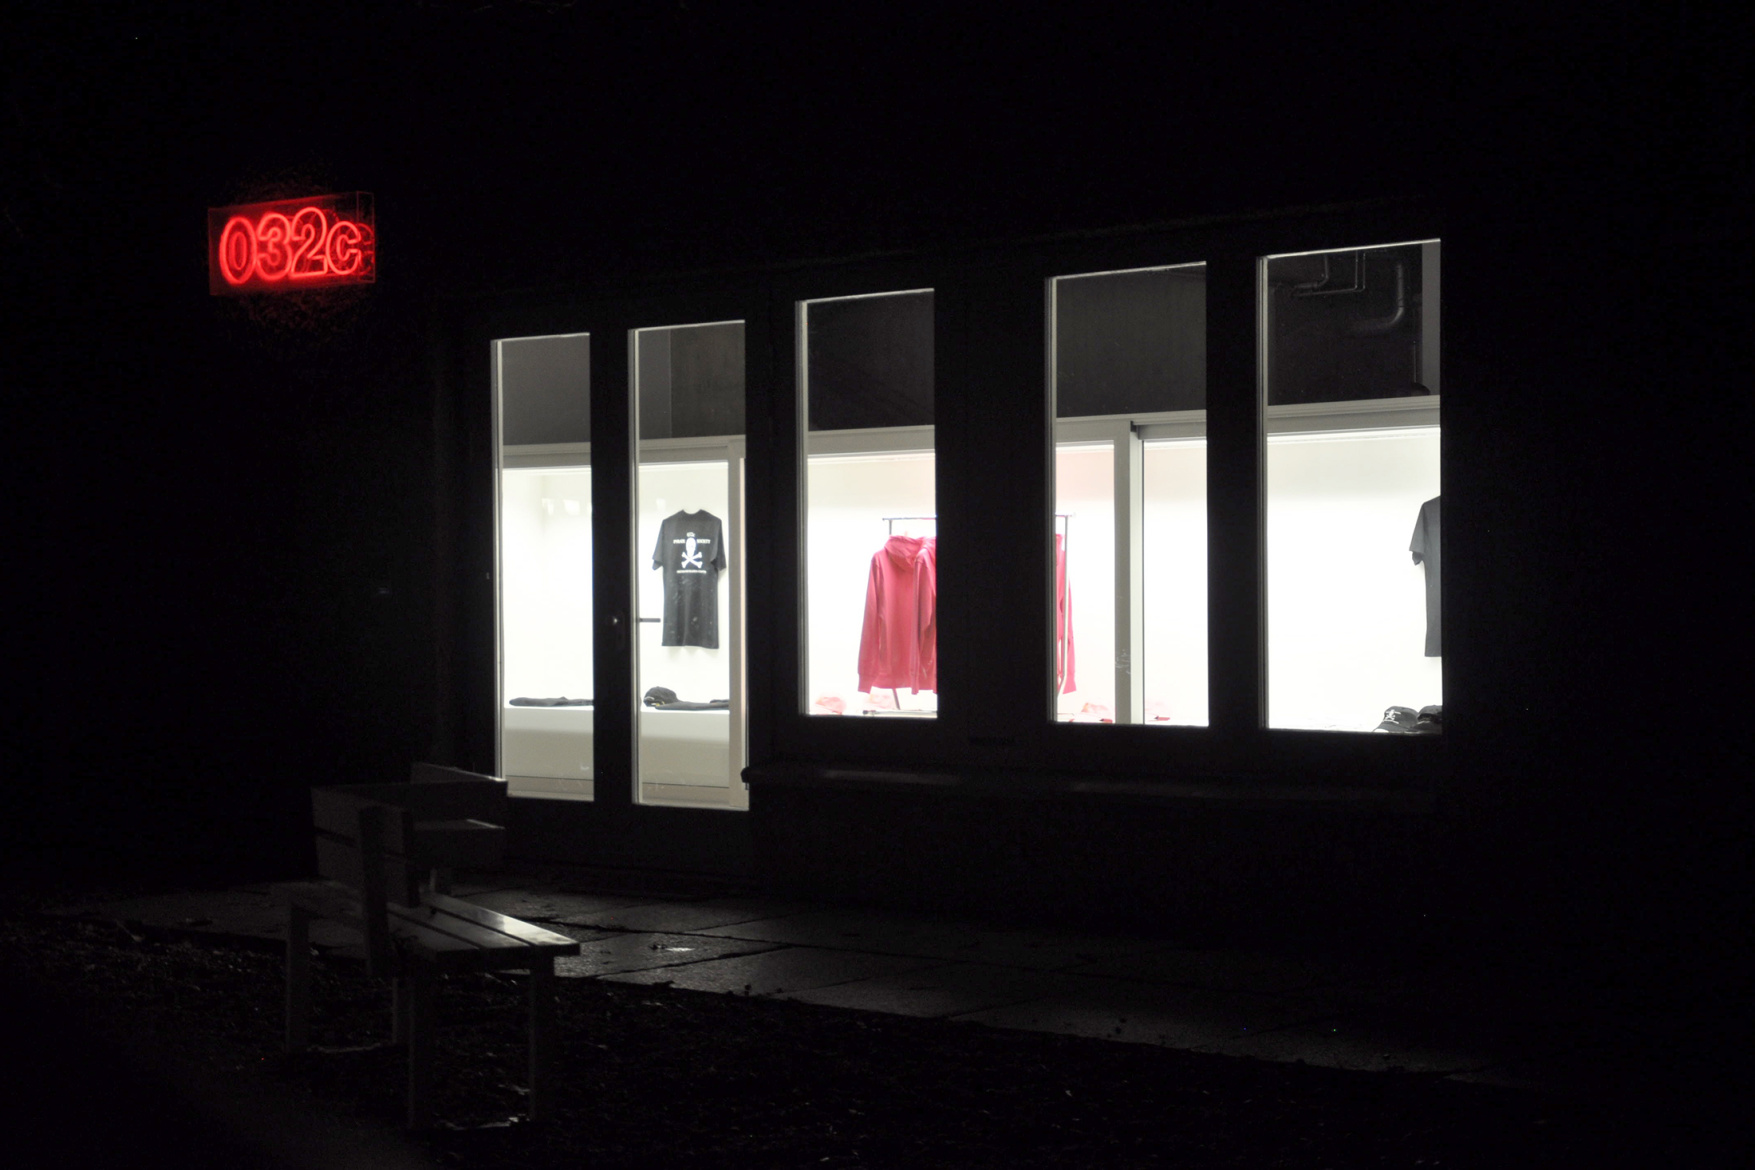 032c Opens First New Store In Berlin